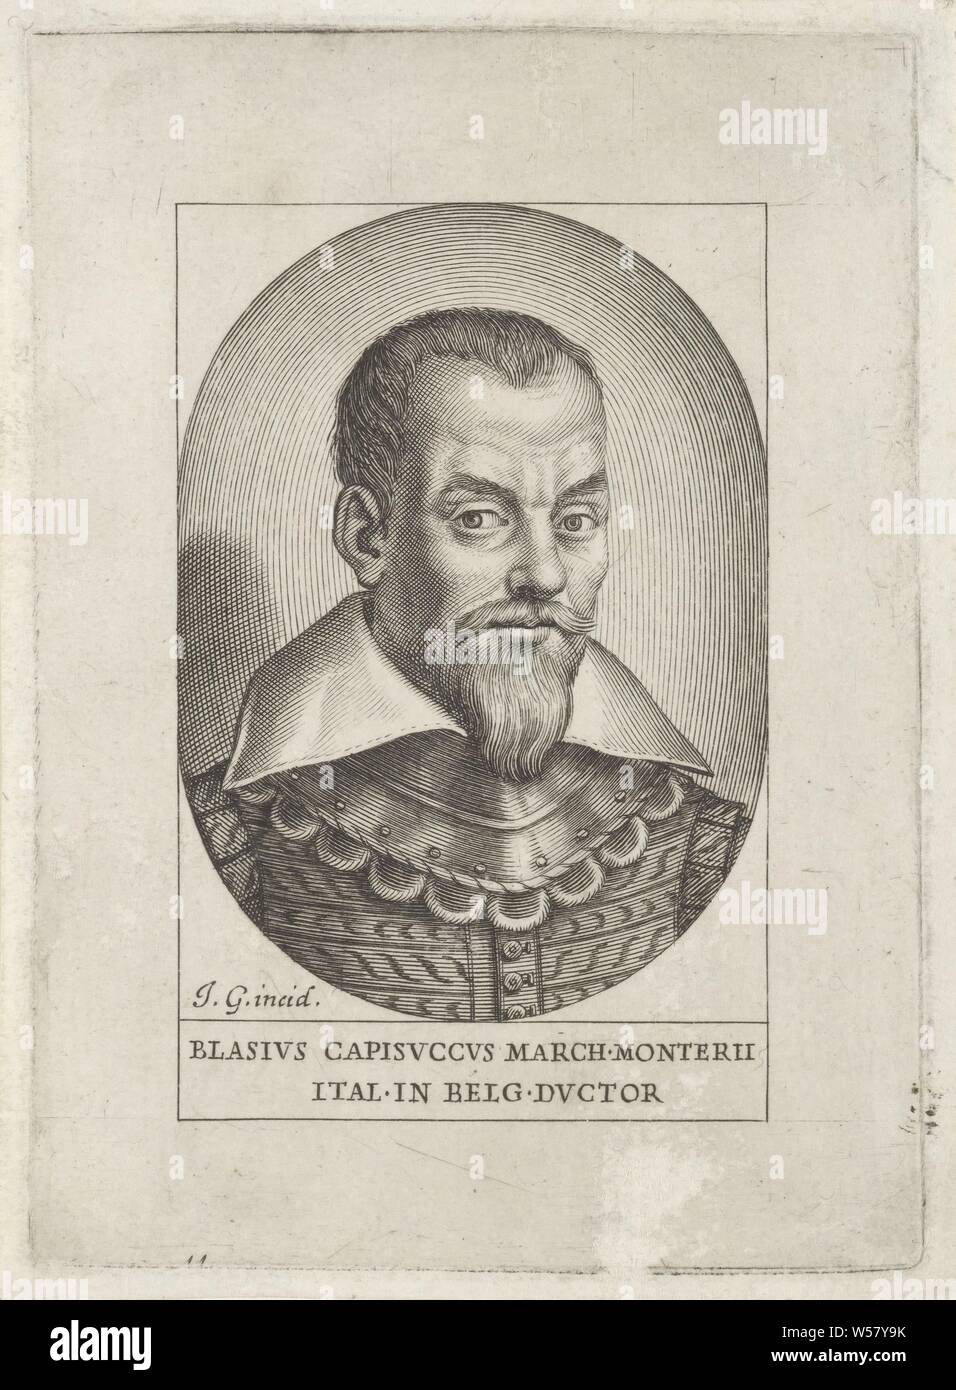 Portrait of Biagio Capizucchi Portraits (series title), historical persons, Biagio Capizucchi, Joseph Greuter (mentioned on object), Italy, c. 1650, paper, engraving, h 131 mm × w 95 mm Stock Photo